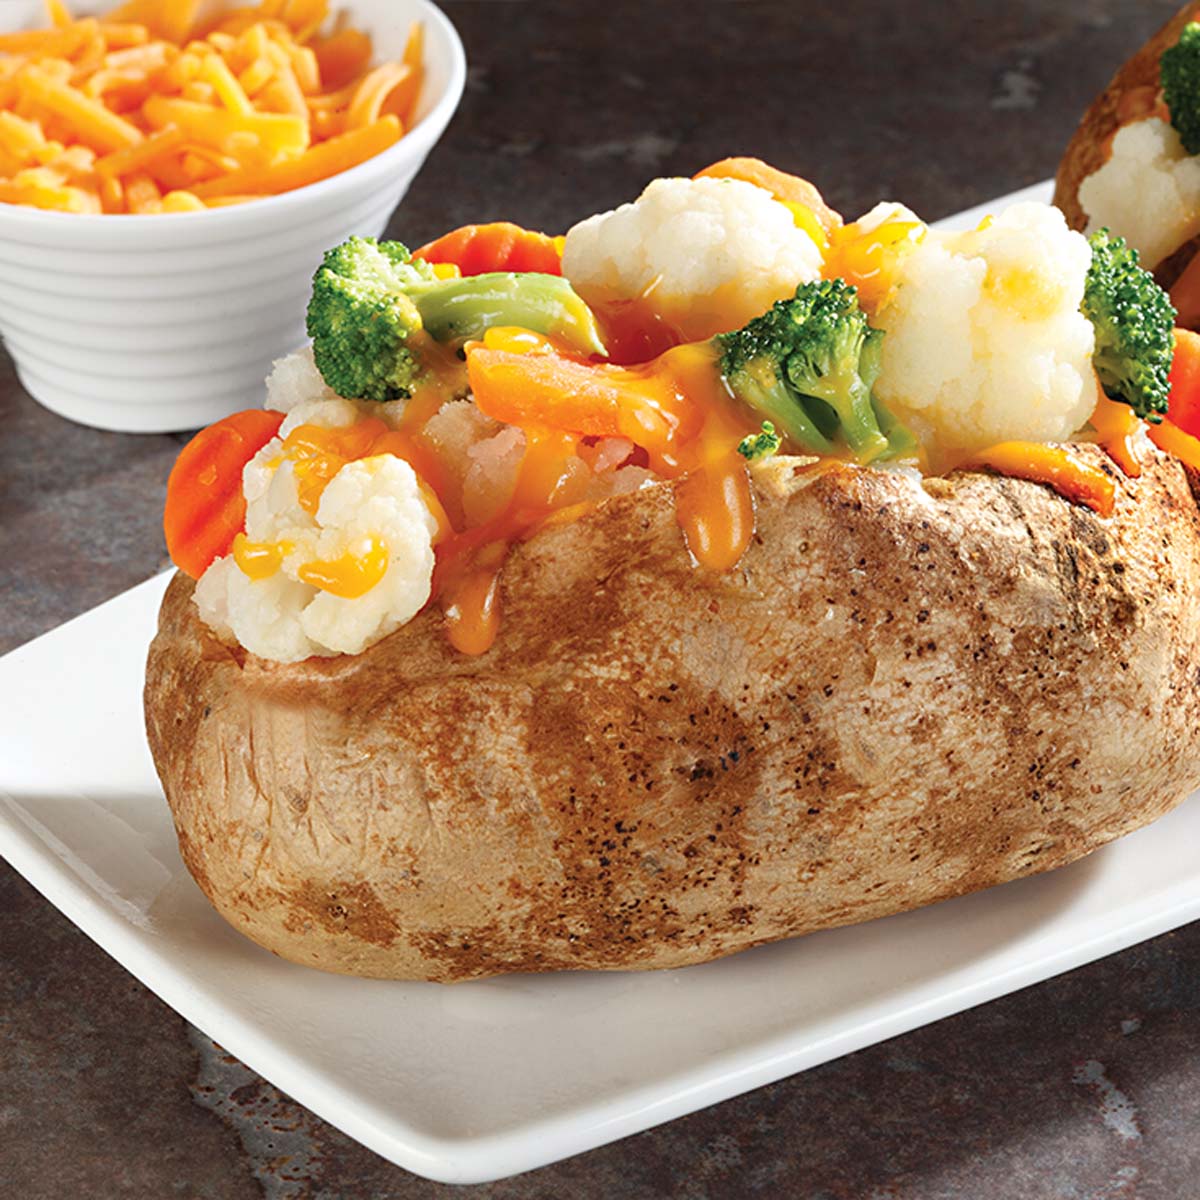 baked potato with cheesy vegetable topping